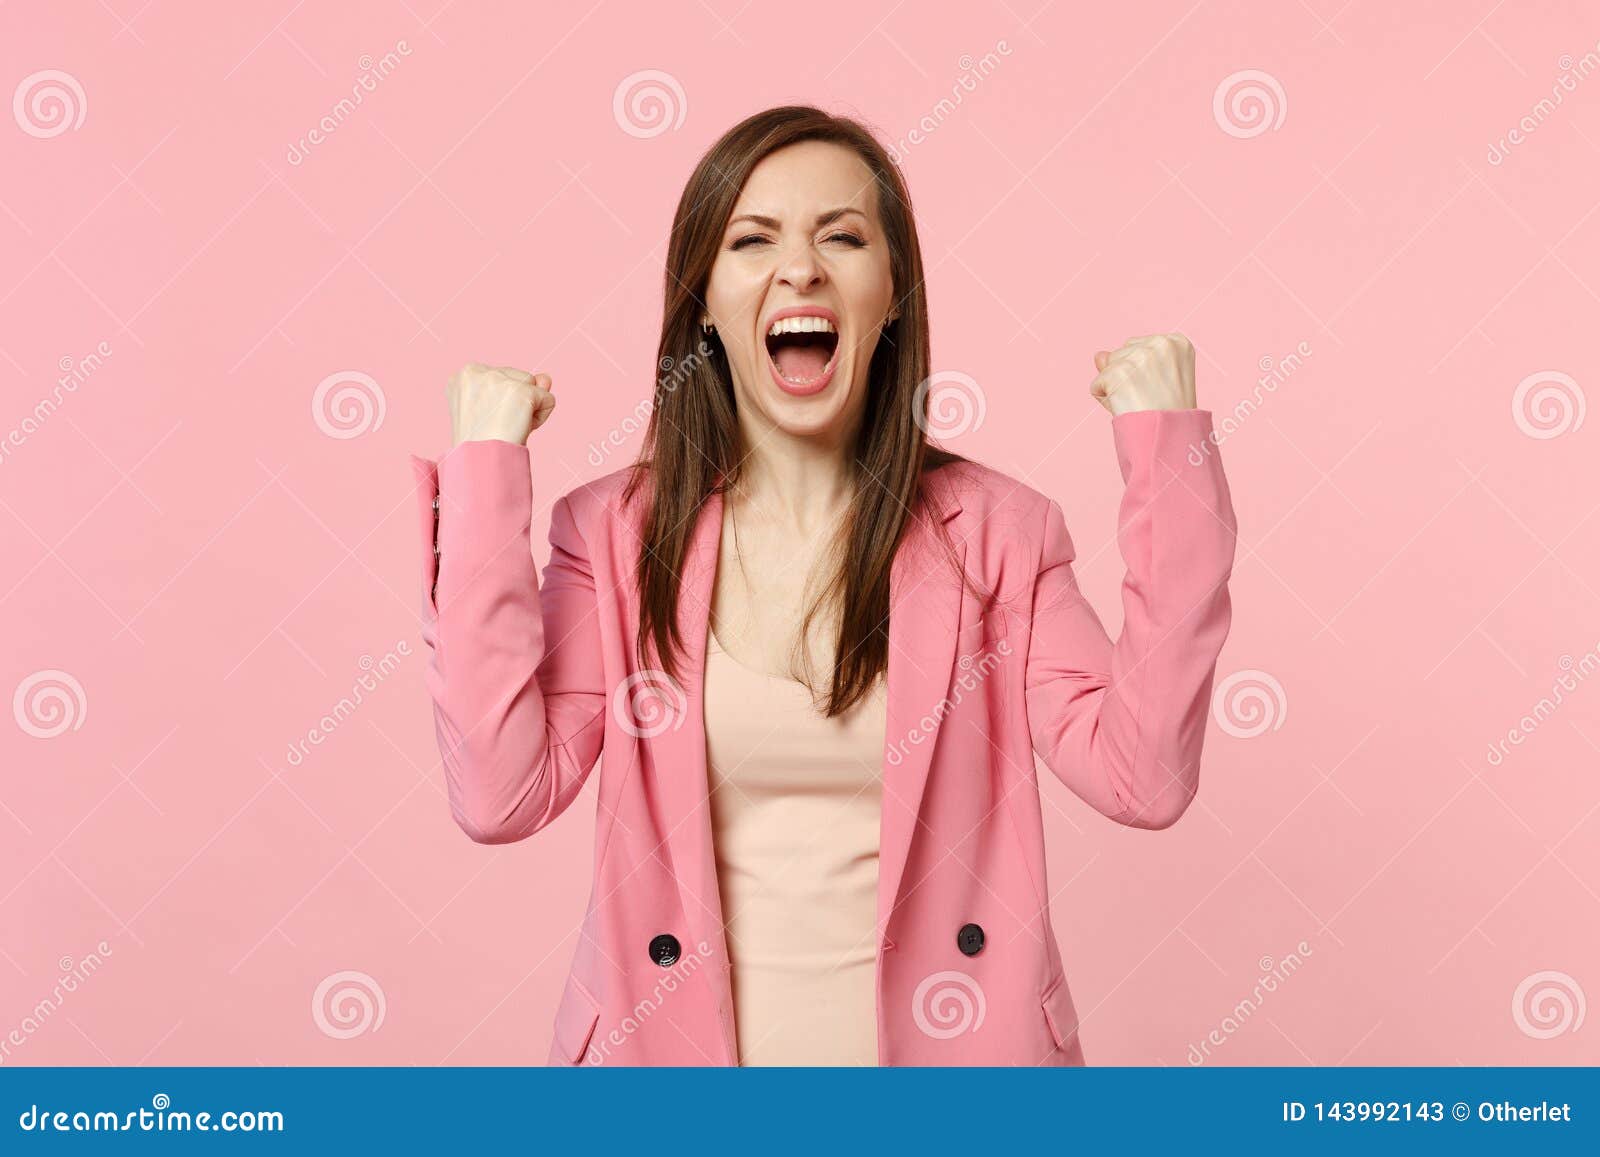 happy screaming young woman in jacket clenching fists like winner expressive gesticulating with hands  on pastel